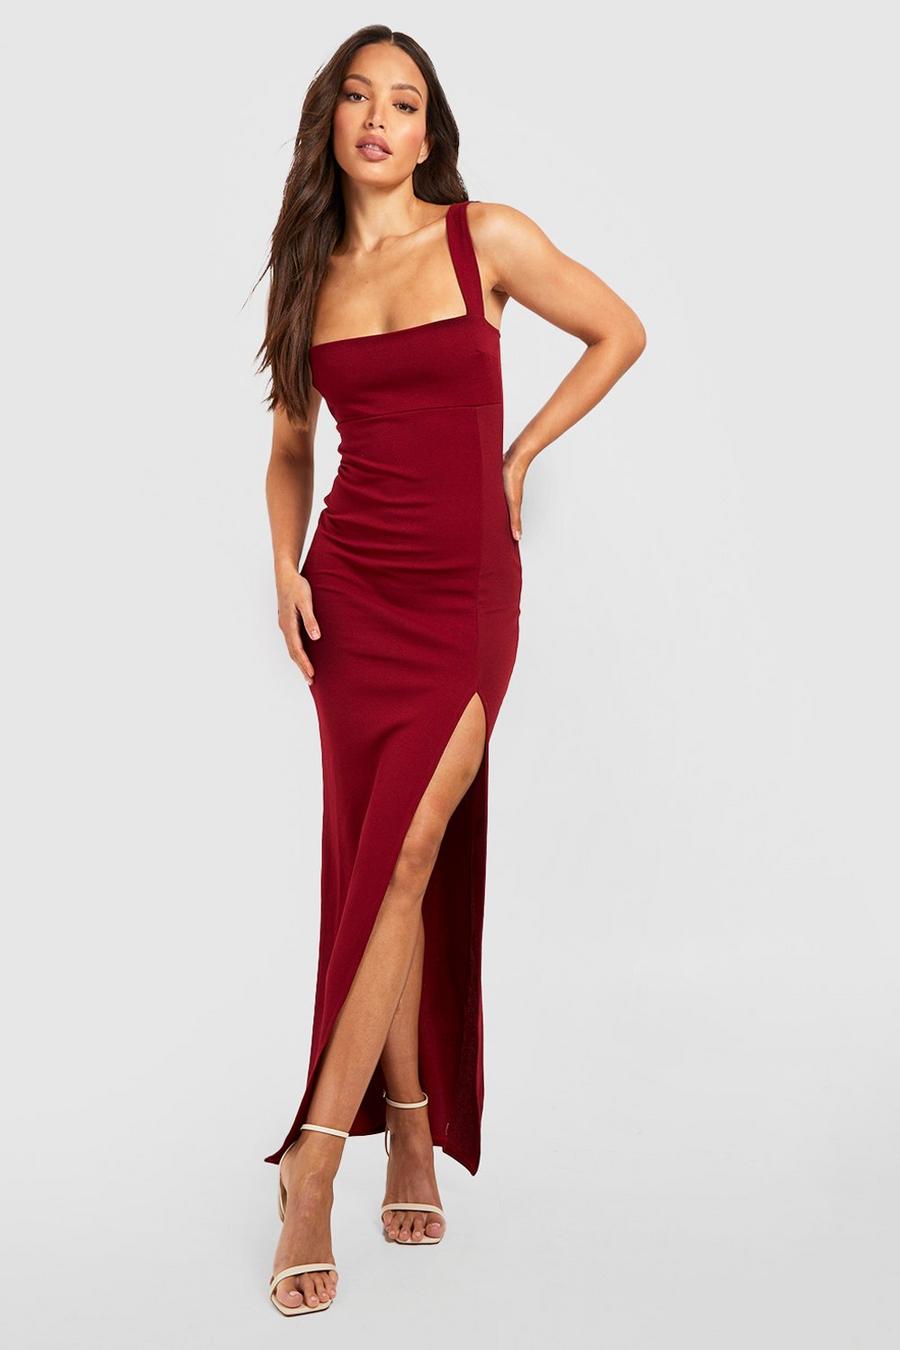 Maxi Dress With Slits On Both Sides Just For Fun